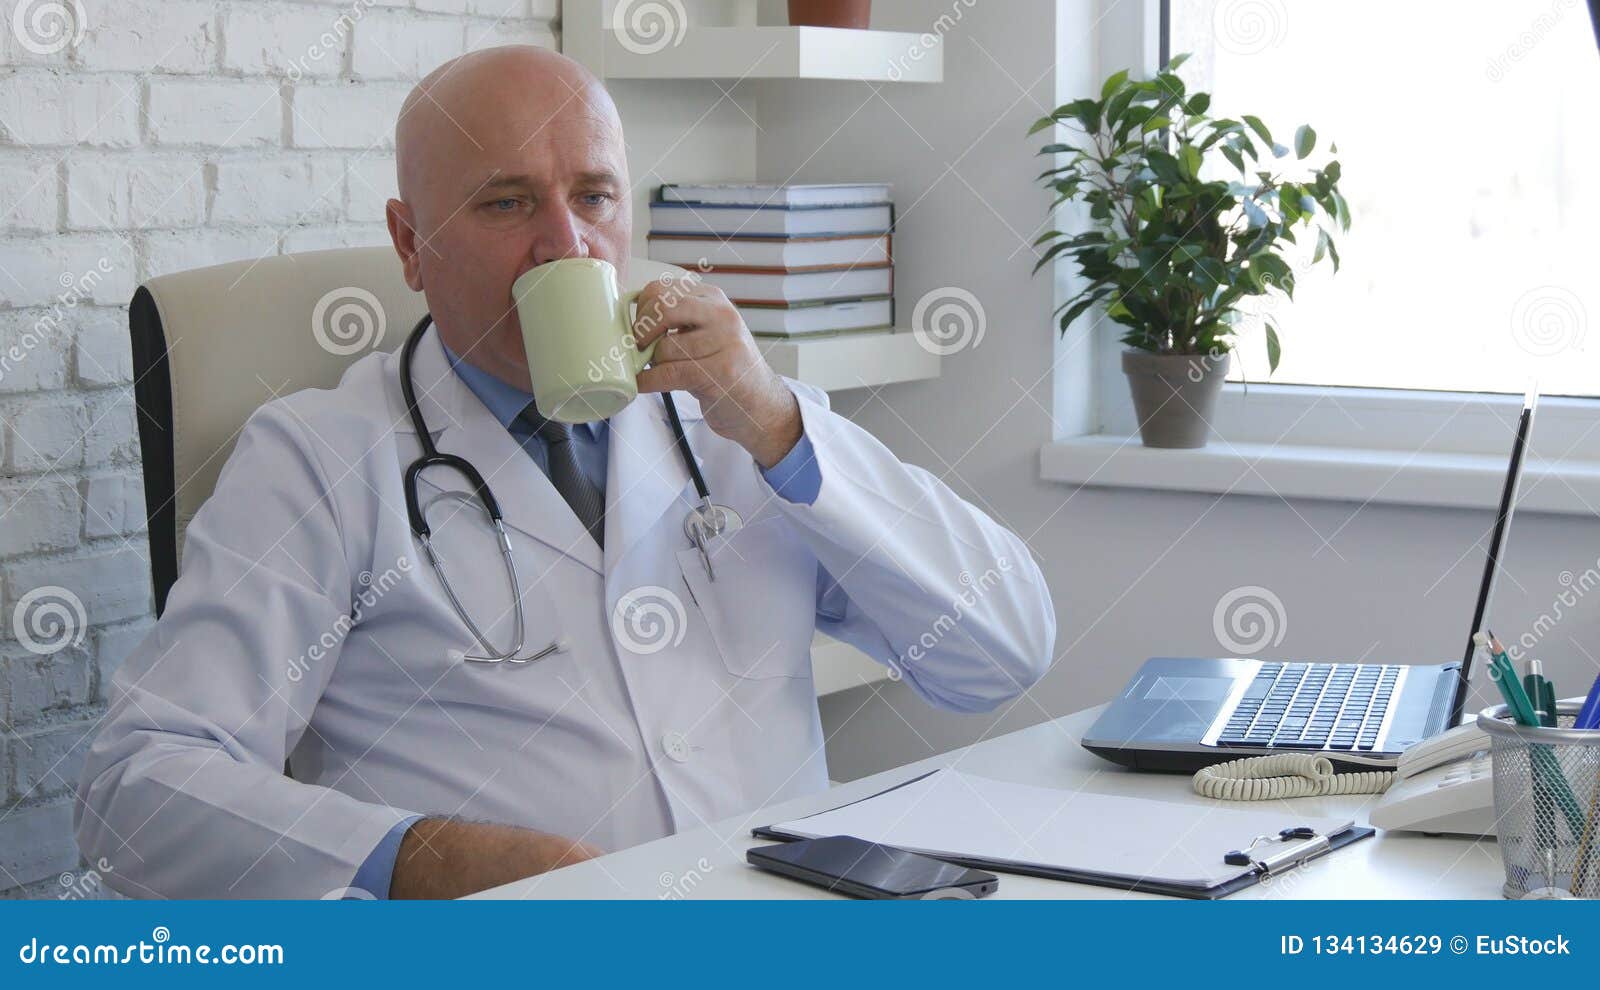 Relaxed Doctor in Office Room Drinking a Coffee Stock Image - Image of ...